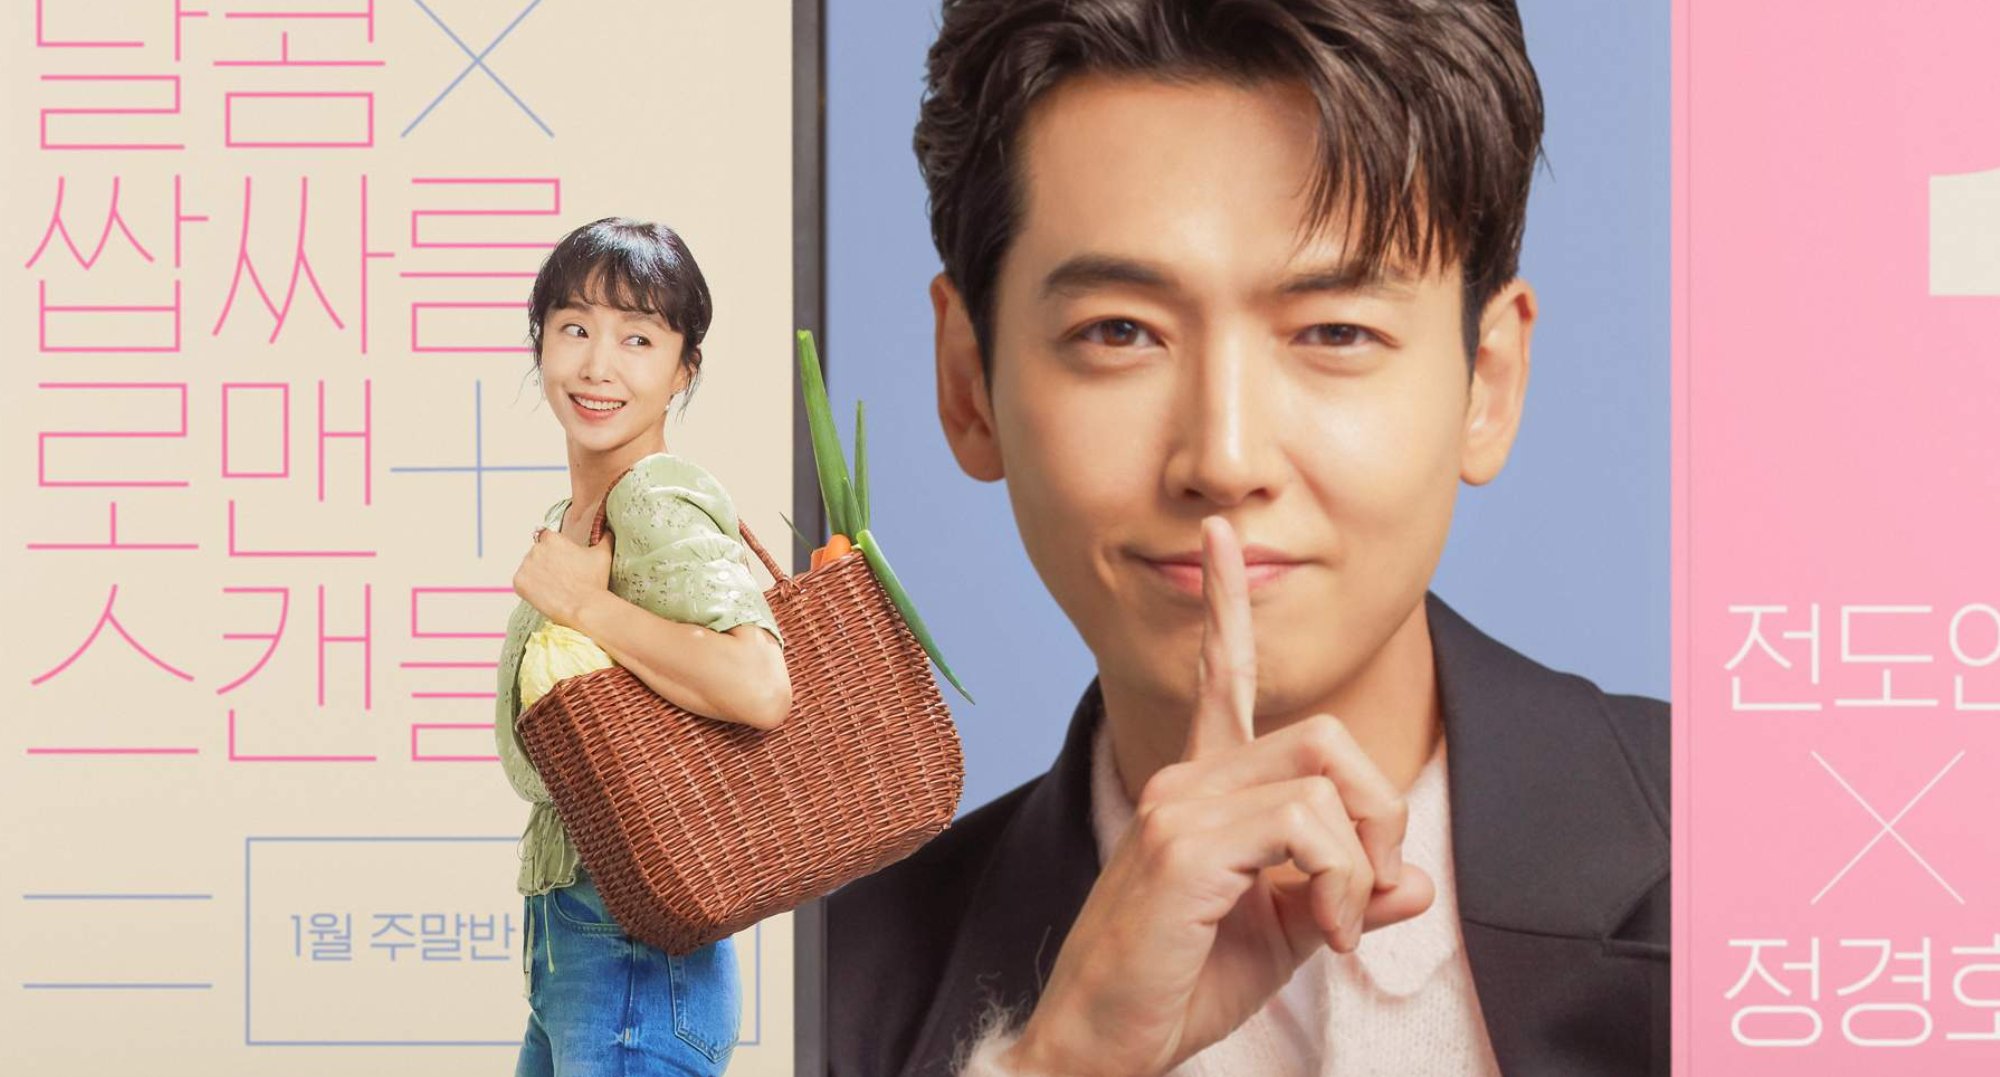 Actors Jeon Do-yeon and Jung Kyung-ho in the K-drama 'Crash Course in Romance.'